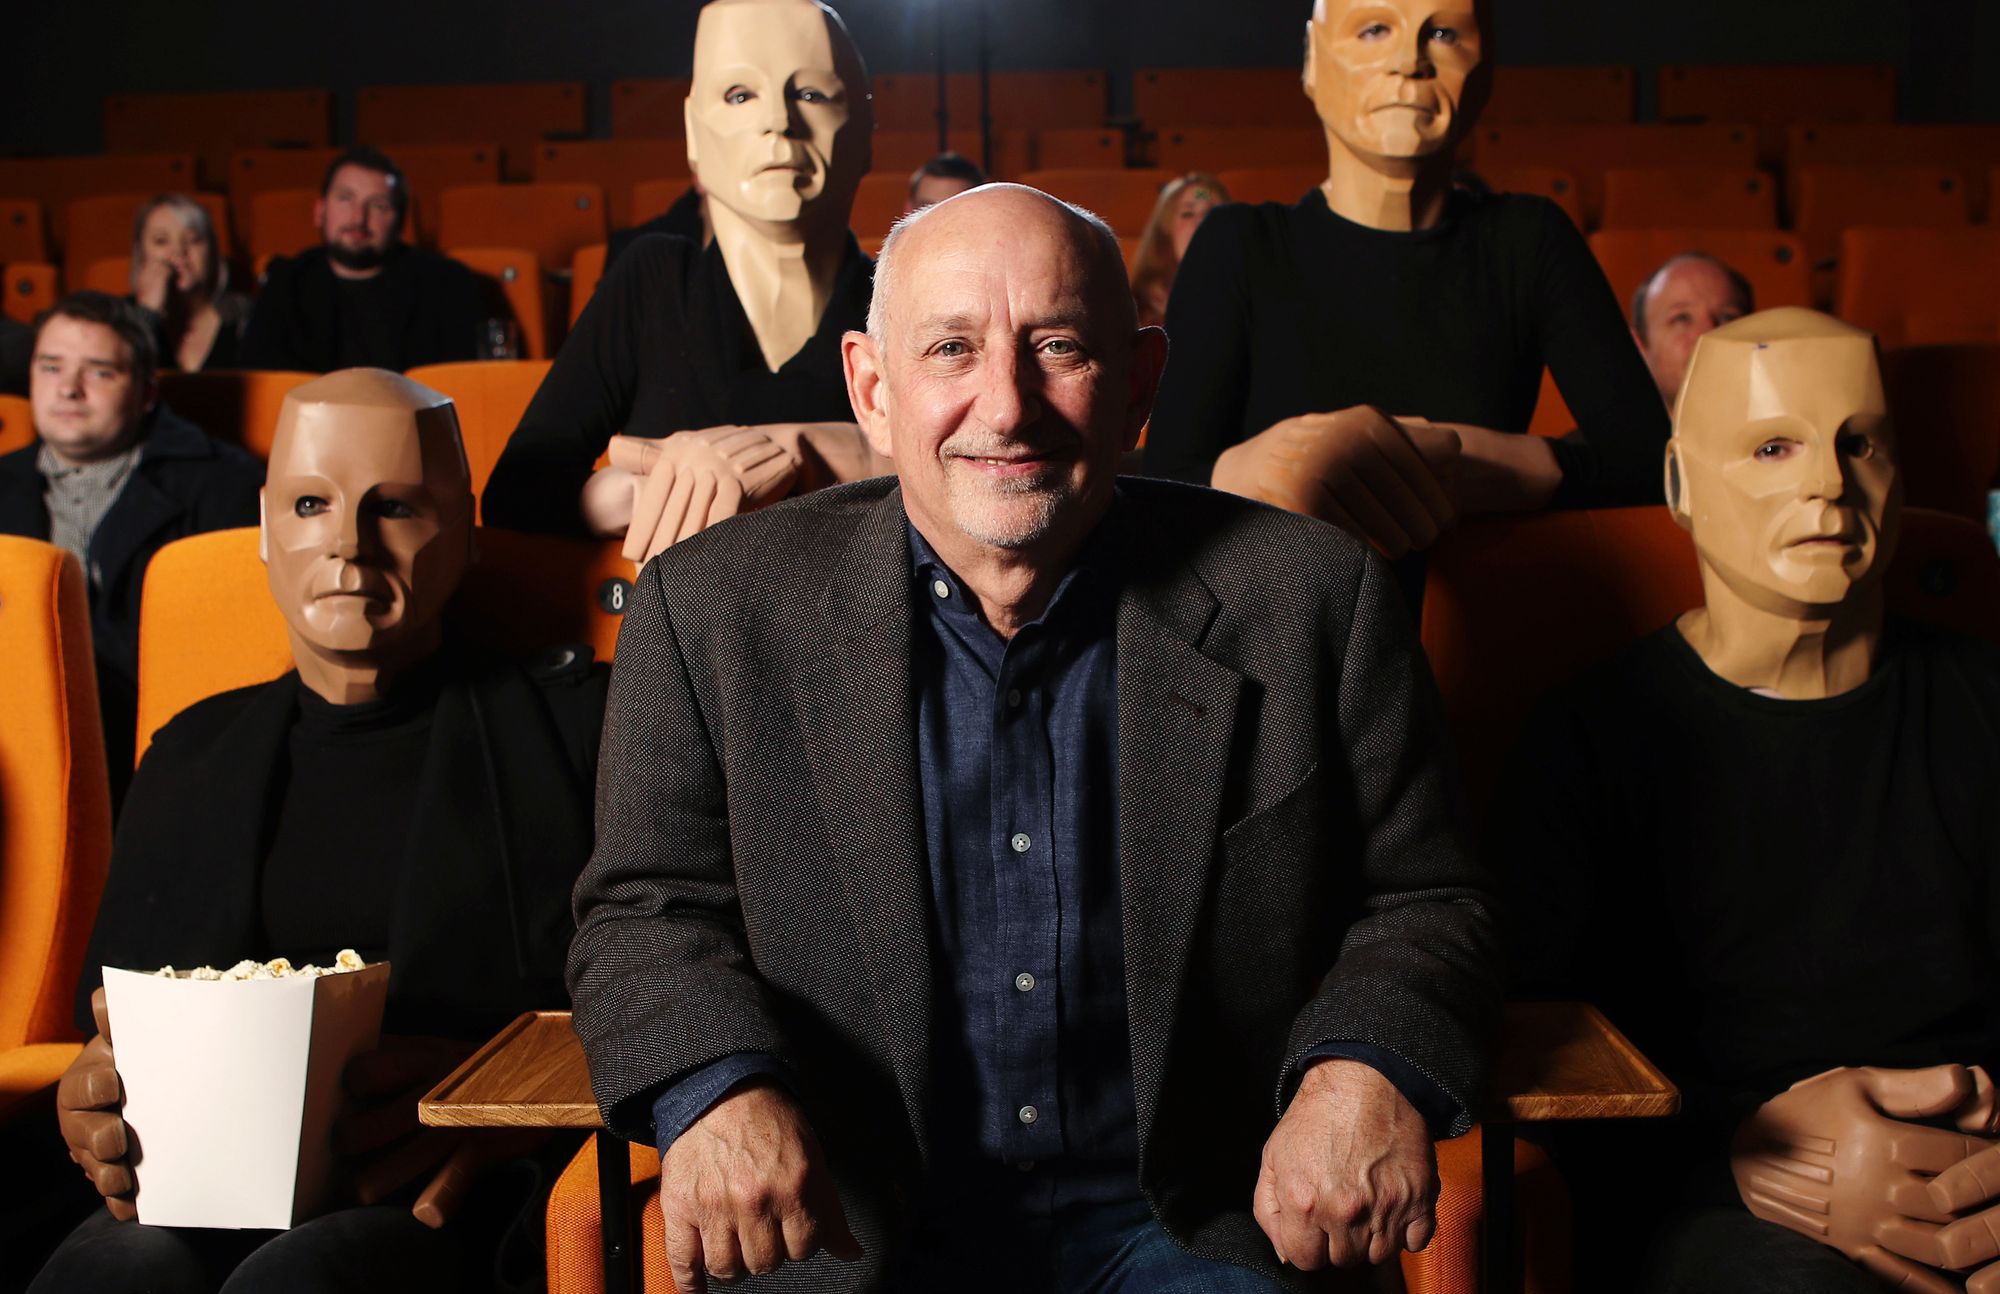 Doug Naylor sits in cinema stalls surrounded by figures in Kryten-style masks.